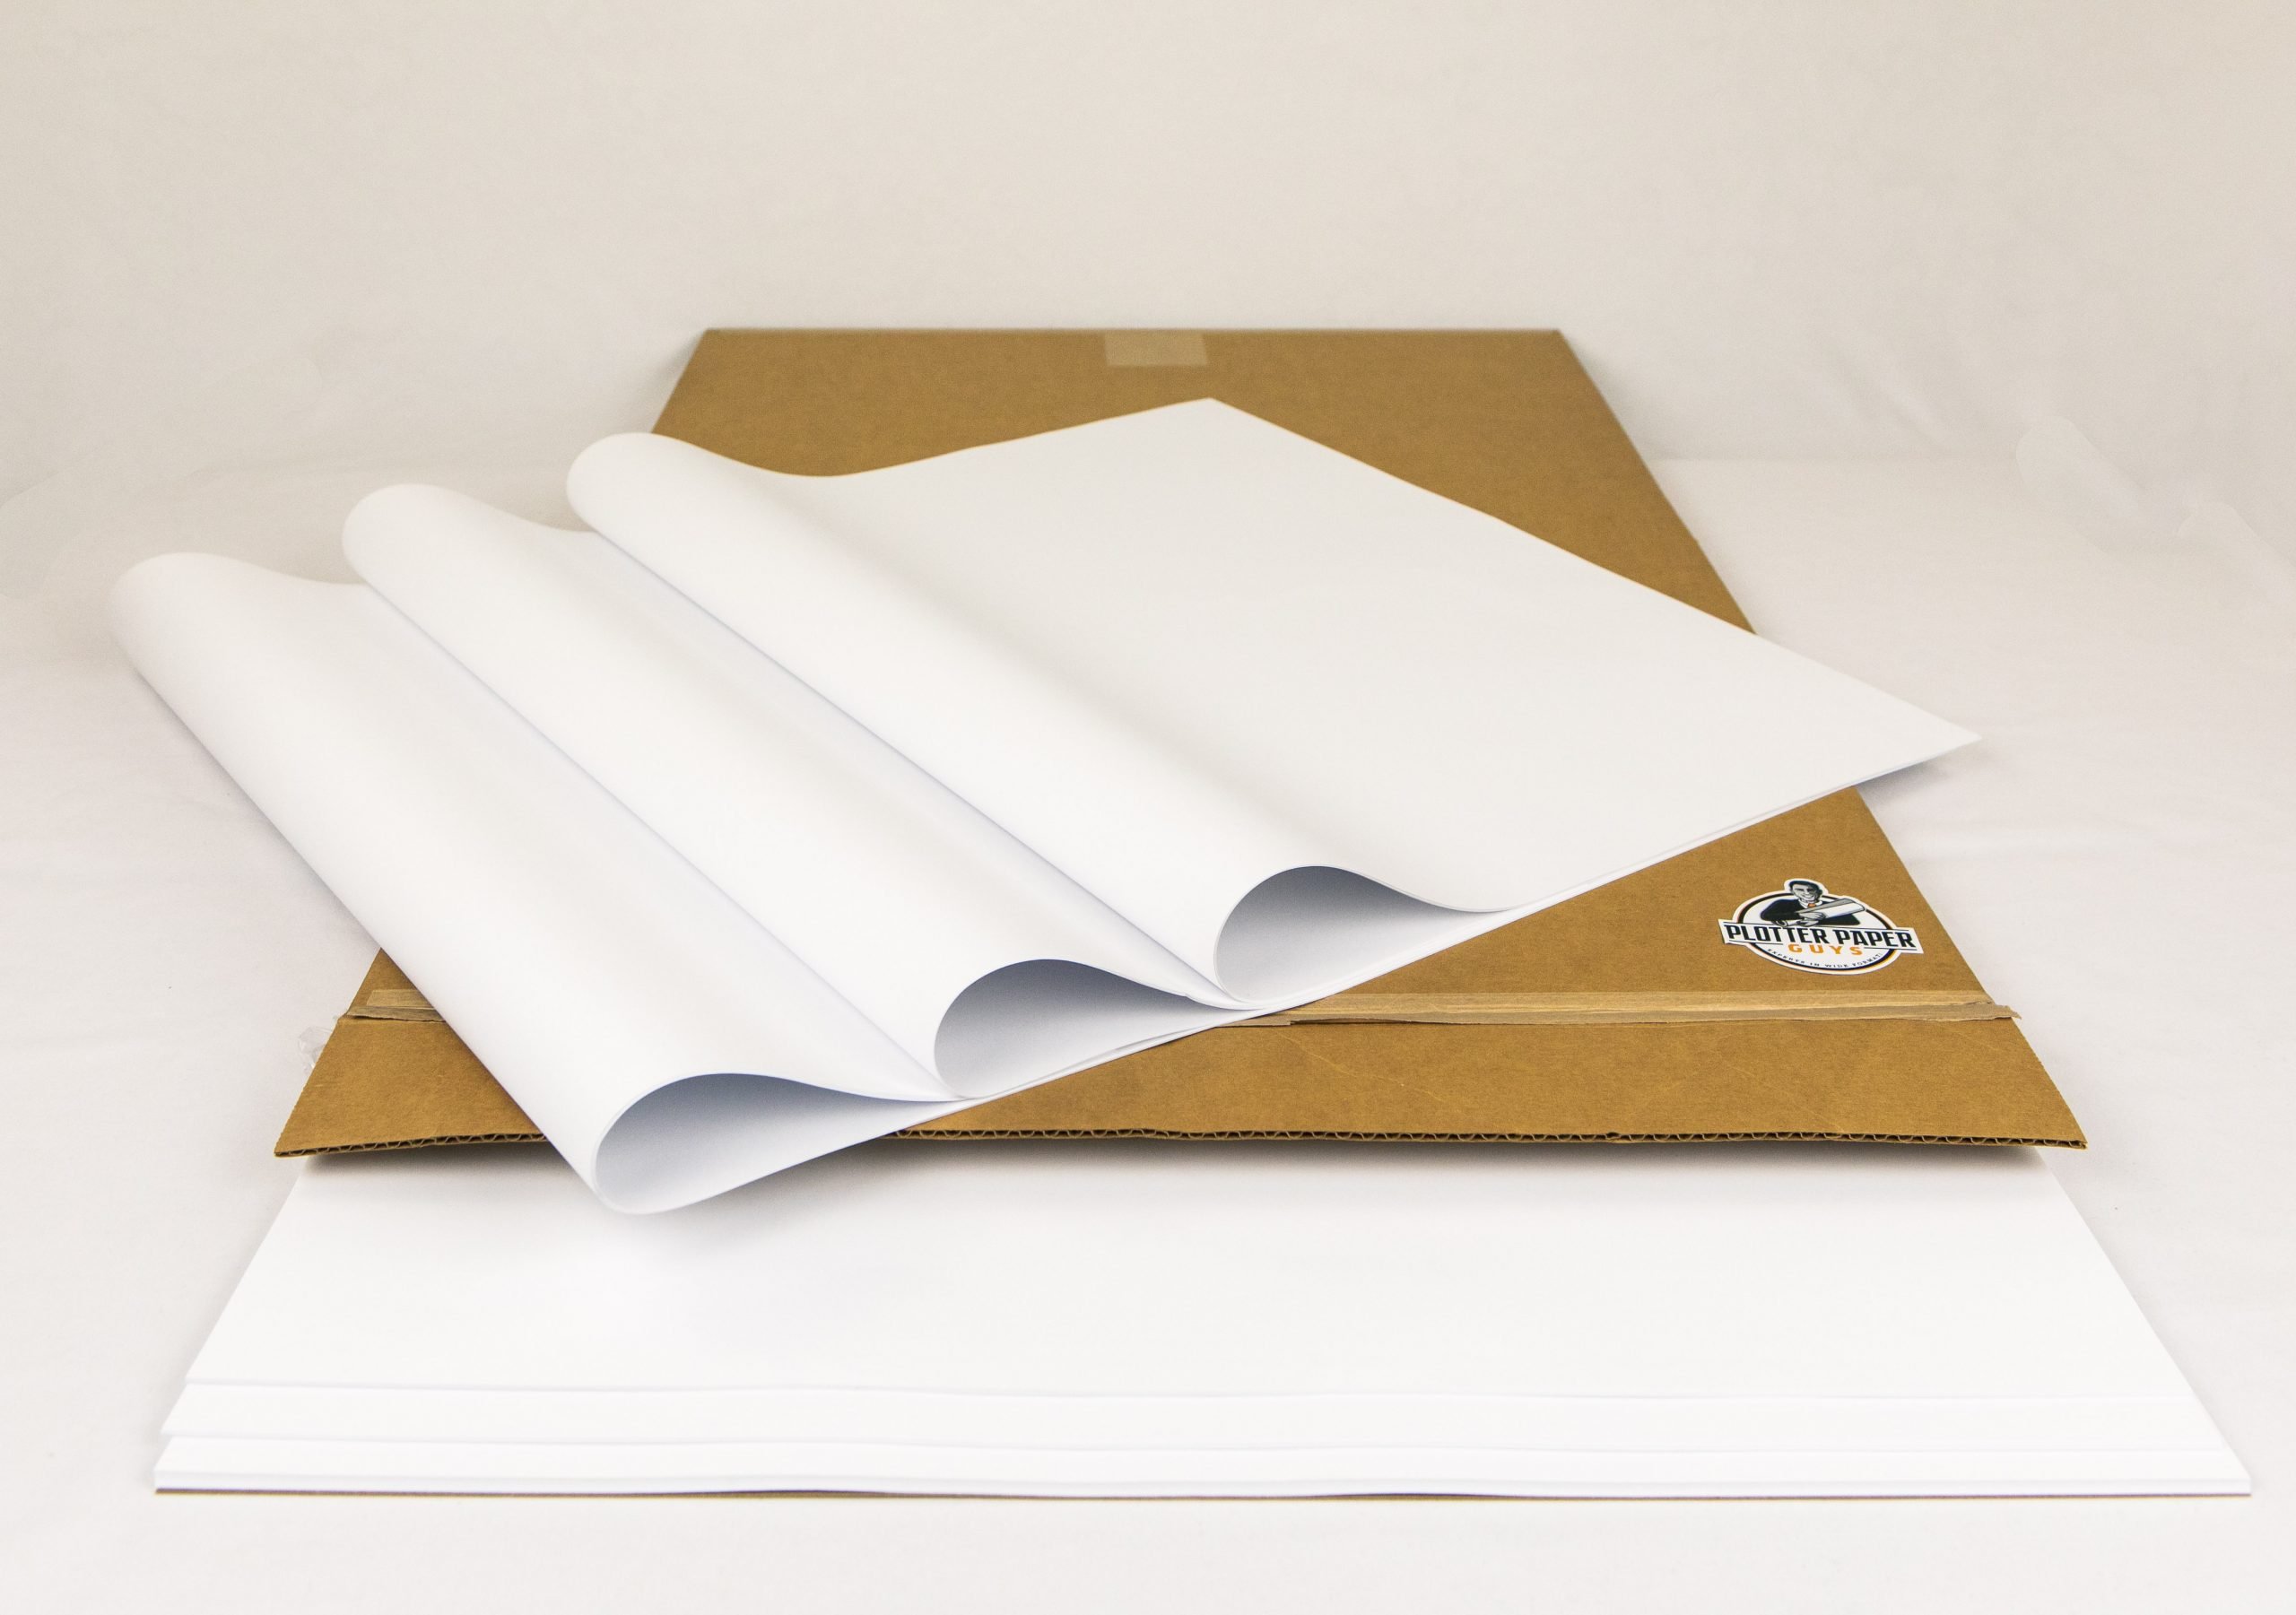 Canon Heavyweight Matte Coated Paper (White, 24 x 100' Roll)